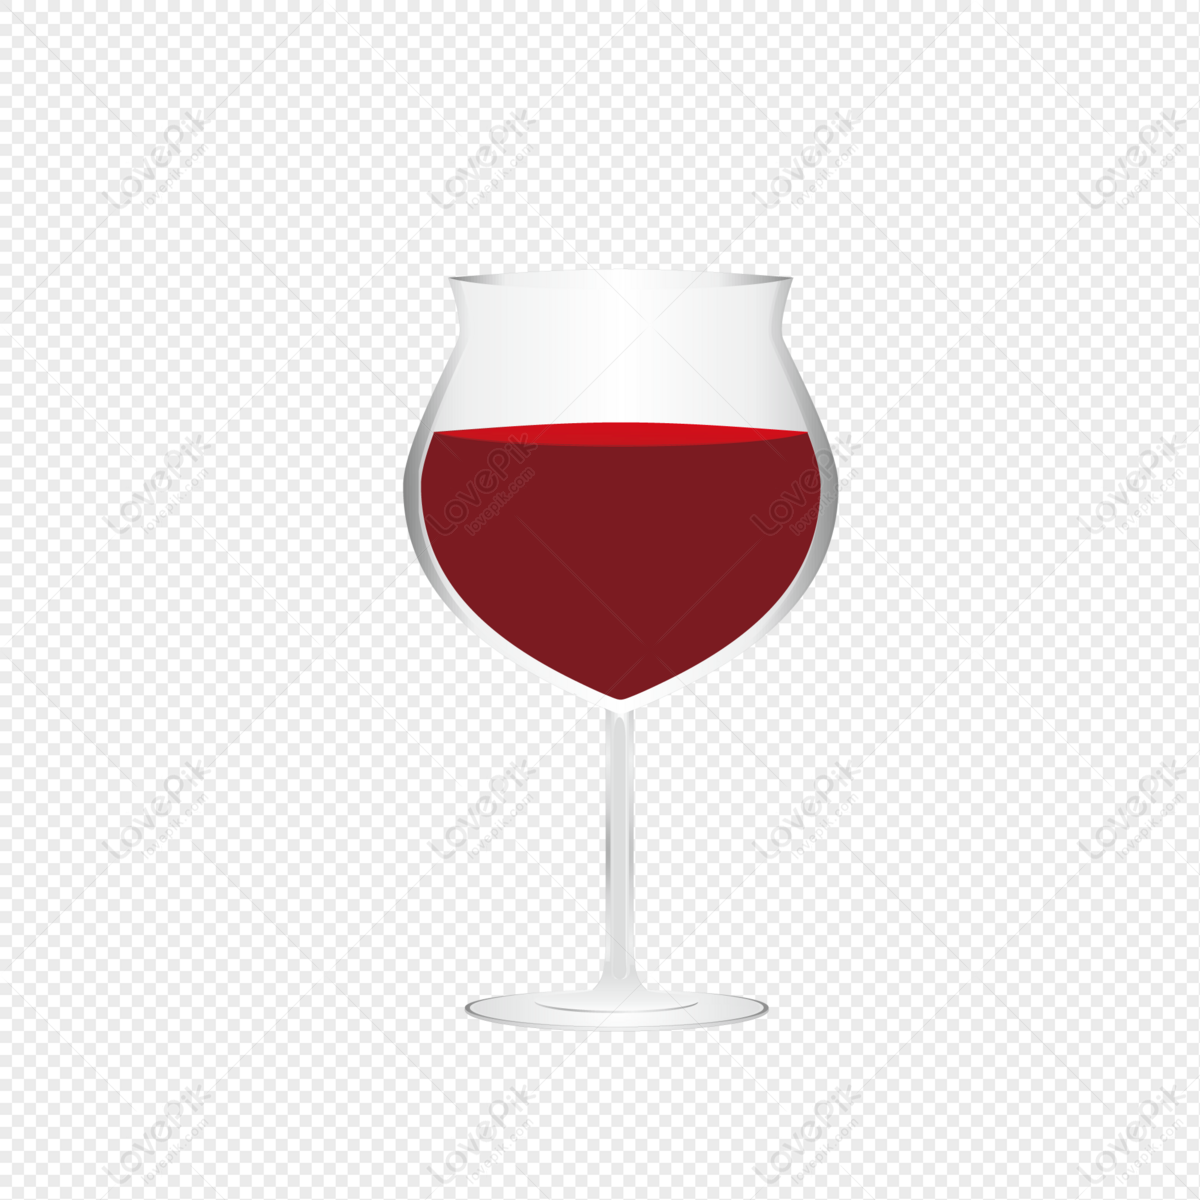 Ai Vector Wine Glass PNG Hd Transparent Image And Clipart Image For Free  Download - Lovepik | 401326614